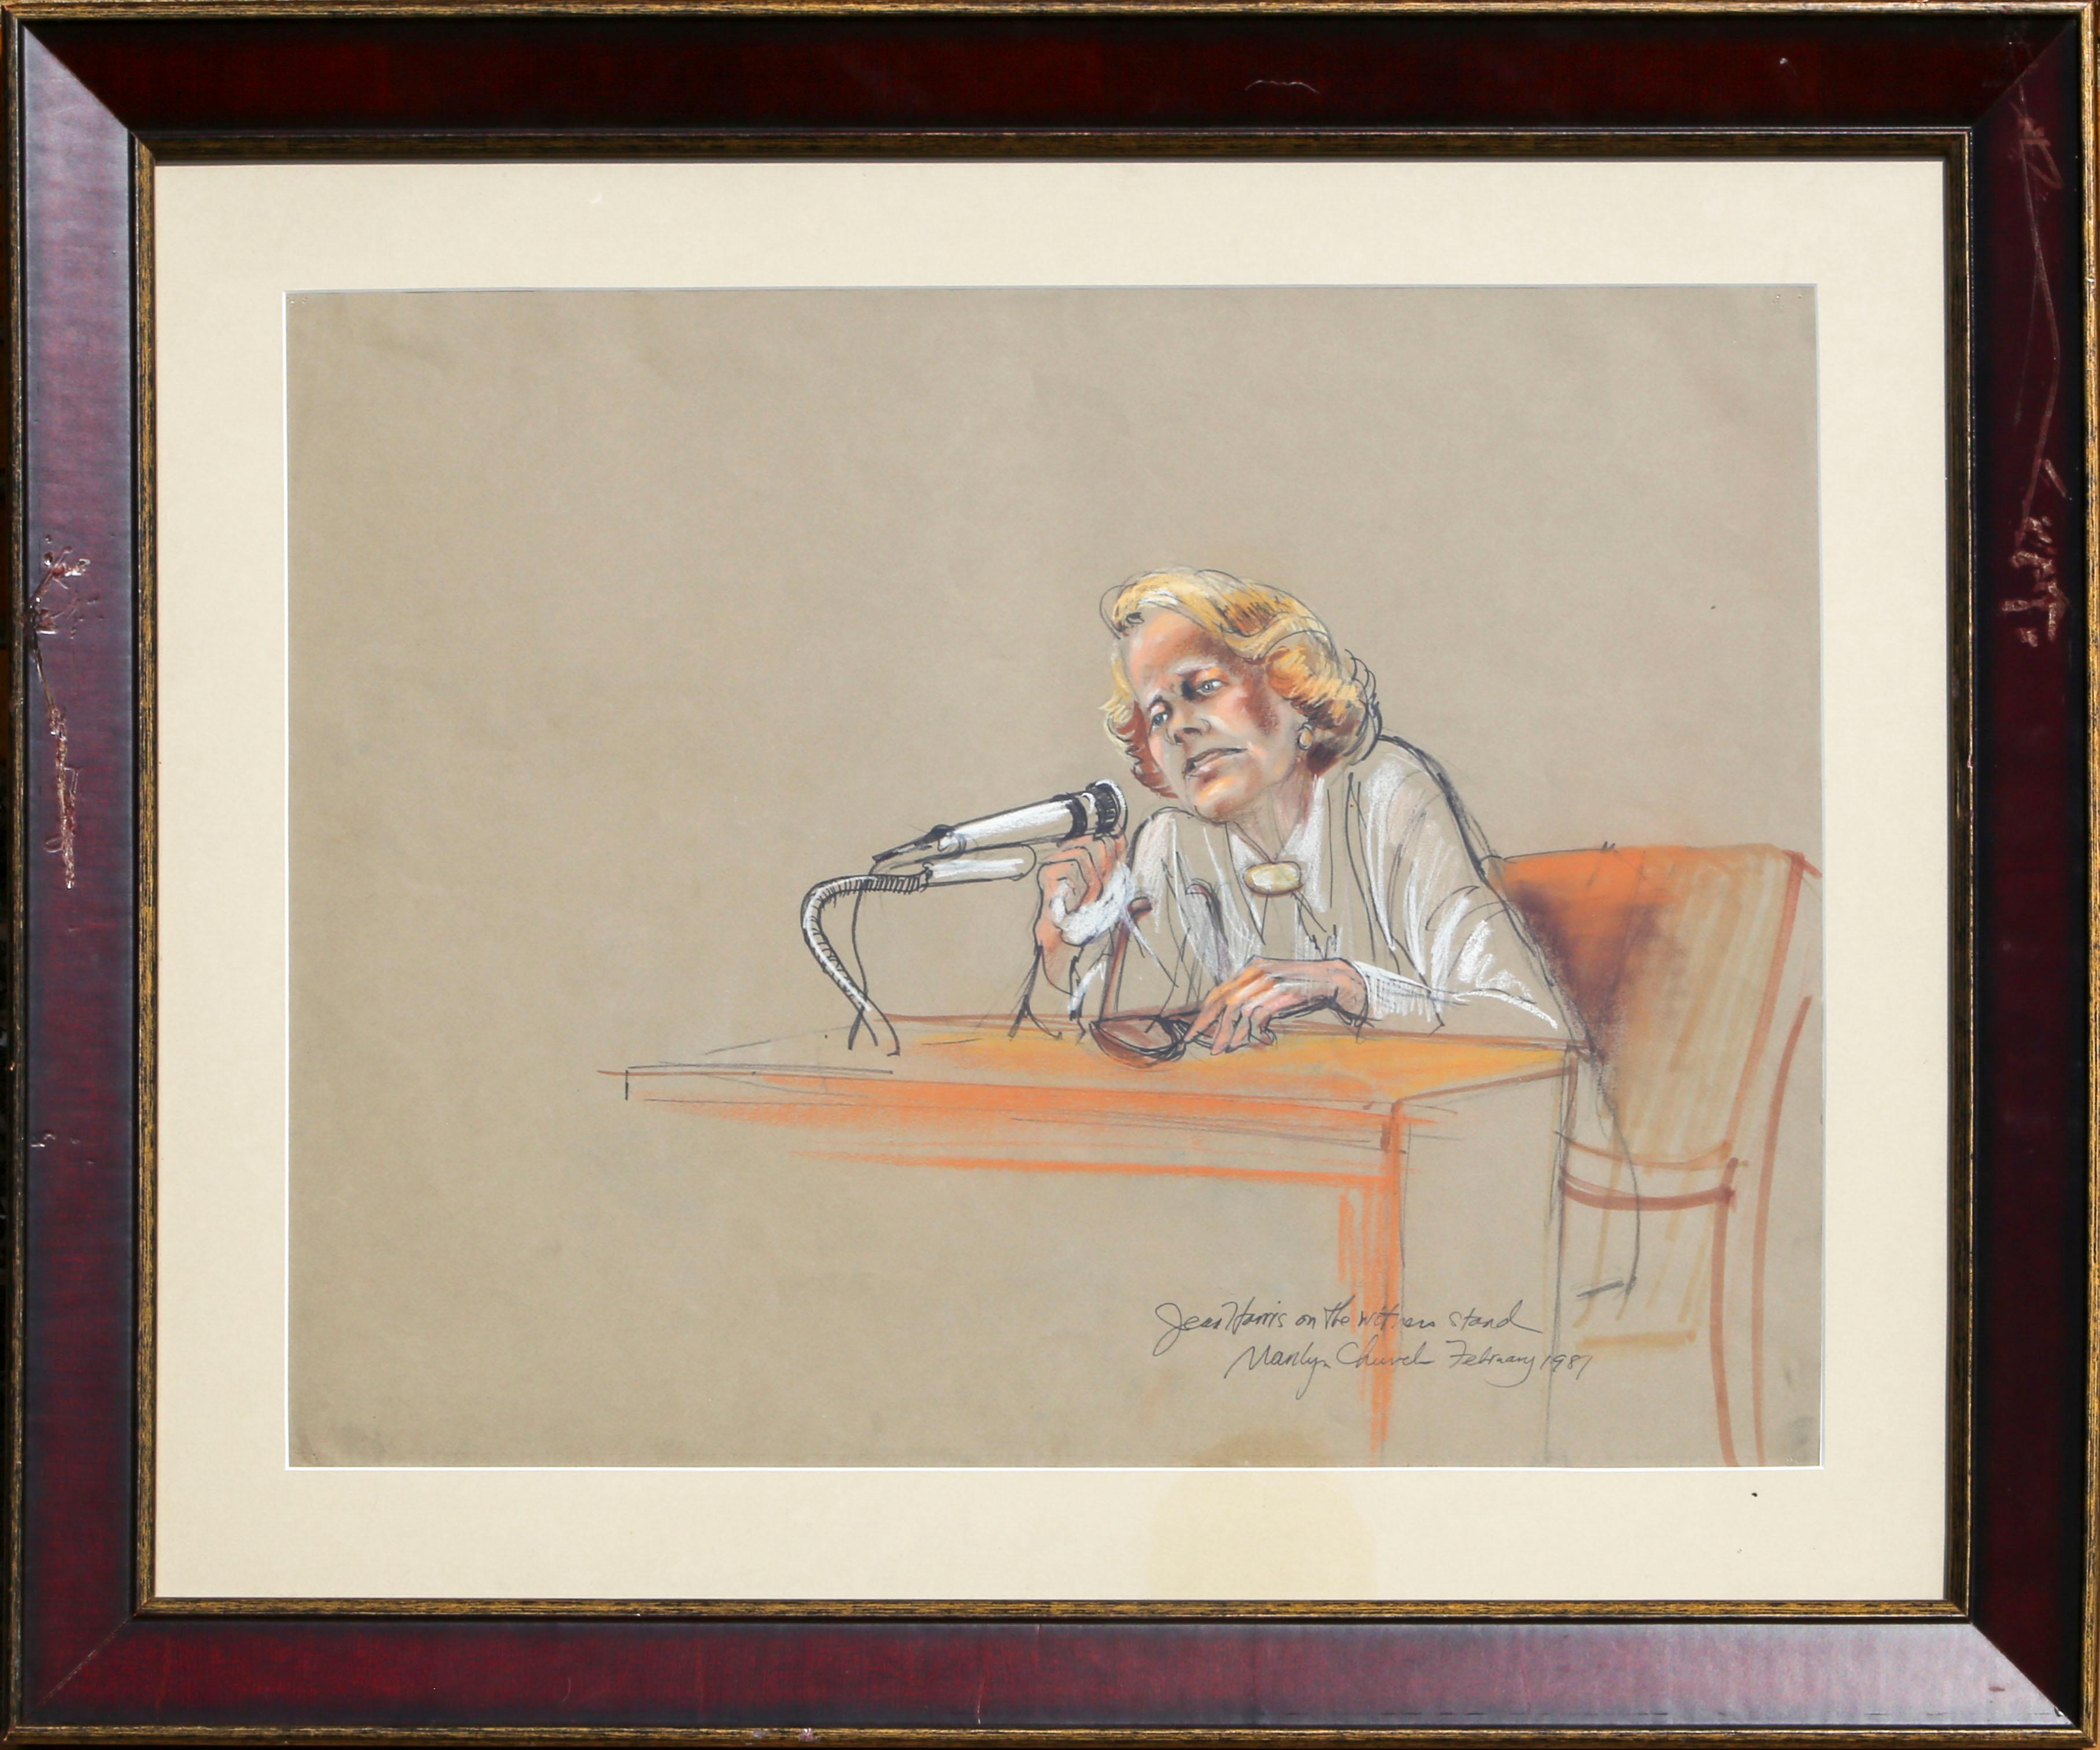 This drawing depicts a moment from one of the longest trials in US history, when Jean Harris, a headmistress of a school for girls in Virginia, was tried for 14 weeks for the murder of her ex-lover, Herman Tarnower. Harris was eventually convicted